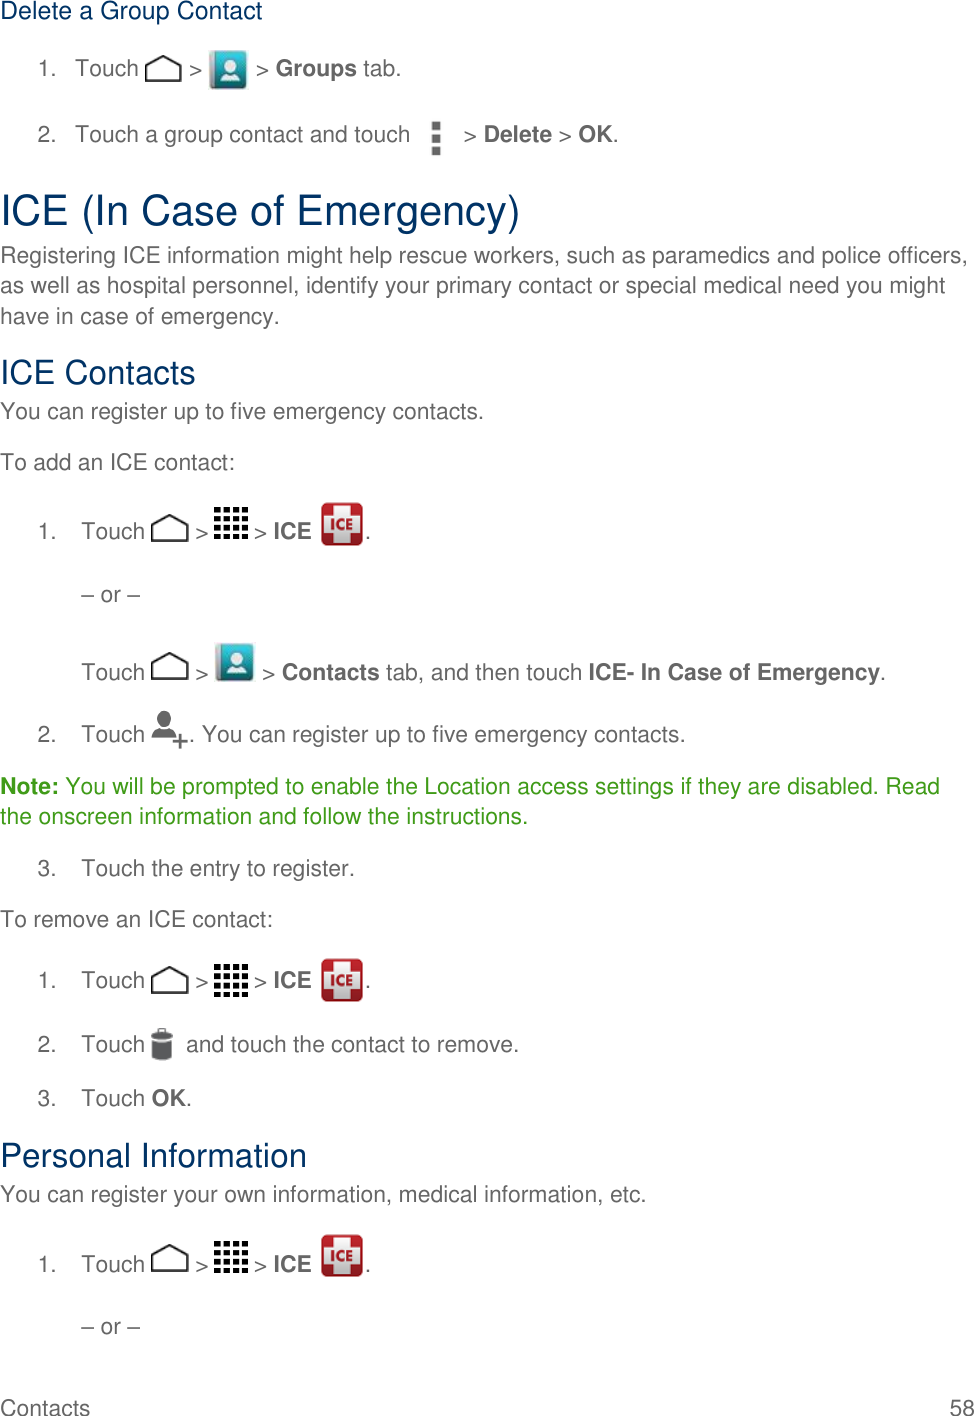 Contacts    58 Delete a Group Contact 1.  Touch   &gt;   &gt; Groups tab. 2.  Touch a group contact and touch  &gt; Delete &gt; OK. ICE (In Case of Emergency) Registering ICE information might help rescue workers, such as paramedics and police officers, as well as hospital personnel, identify your primary contact or special medical need you might have in case of emergency. ICE Contacts You can register up to five emergency contacts. To add an ICE contact: 1.  Touch   &gt;   &gt; ICE  .   – or –   Touch   &gt;   &gt; Contacts tab, and then touch ICE- In Case of Emergency. 2.  Touch  . You can register up to five emergency contacts. Note: You will be prompted to enable the Location access settings if they are disabled. Read the onscreen information and follow the instructions. 3.  Touch the entry to register. To remove an ICE contact: 1.  Touch   &gt;   &gt; ICE  . 2.  Touch    and touch the contact to remove. 3.  Touch OK. Personal Information  You can register your own information, medical information, etc. 1.  Touch   &gt;   &gt; ICE  .   – or –  